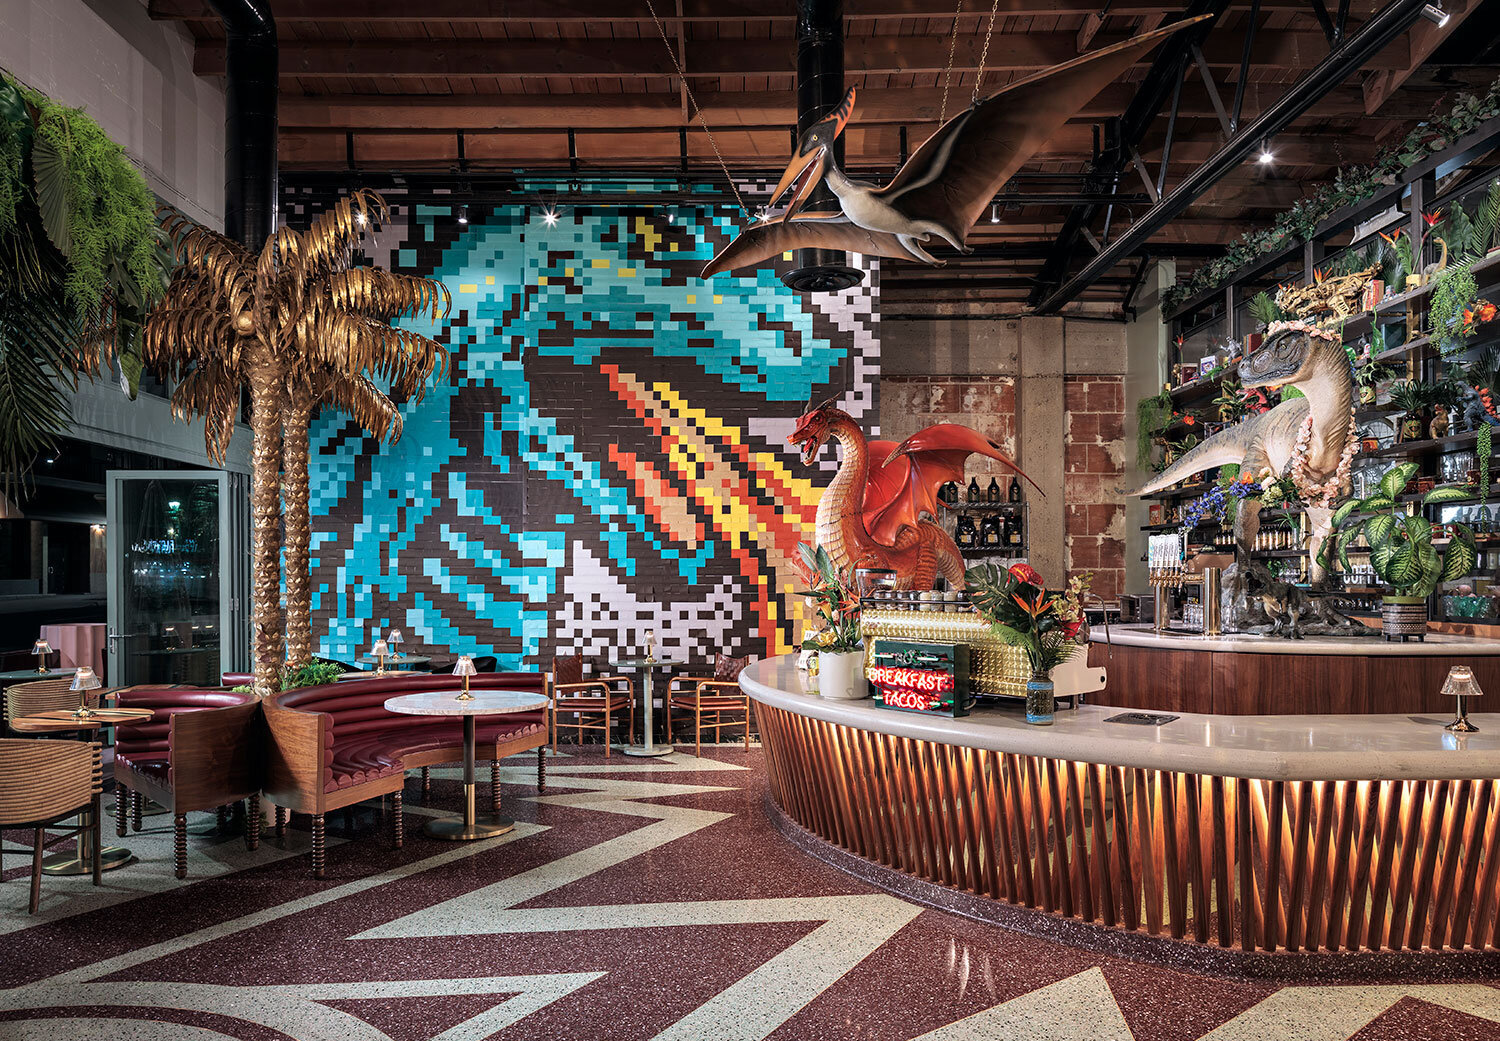 Interior of The Invigatorium brewery and bar in East Village, San Diego featuring a colorful bar full of life-size dinosaur statues